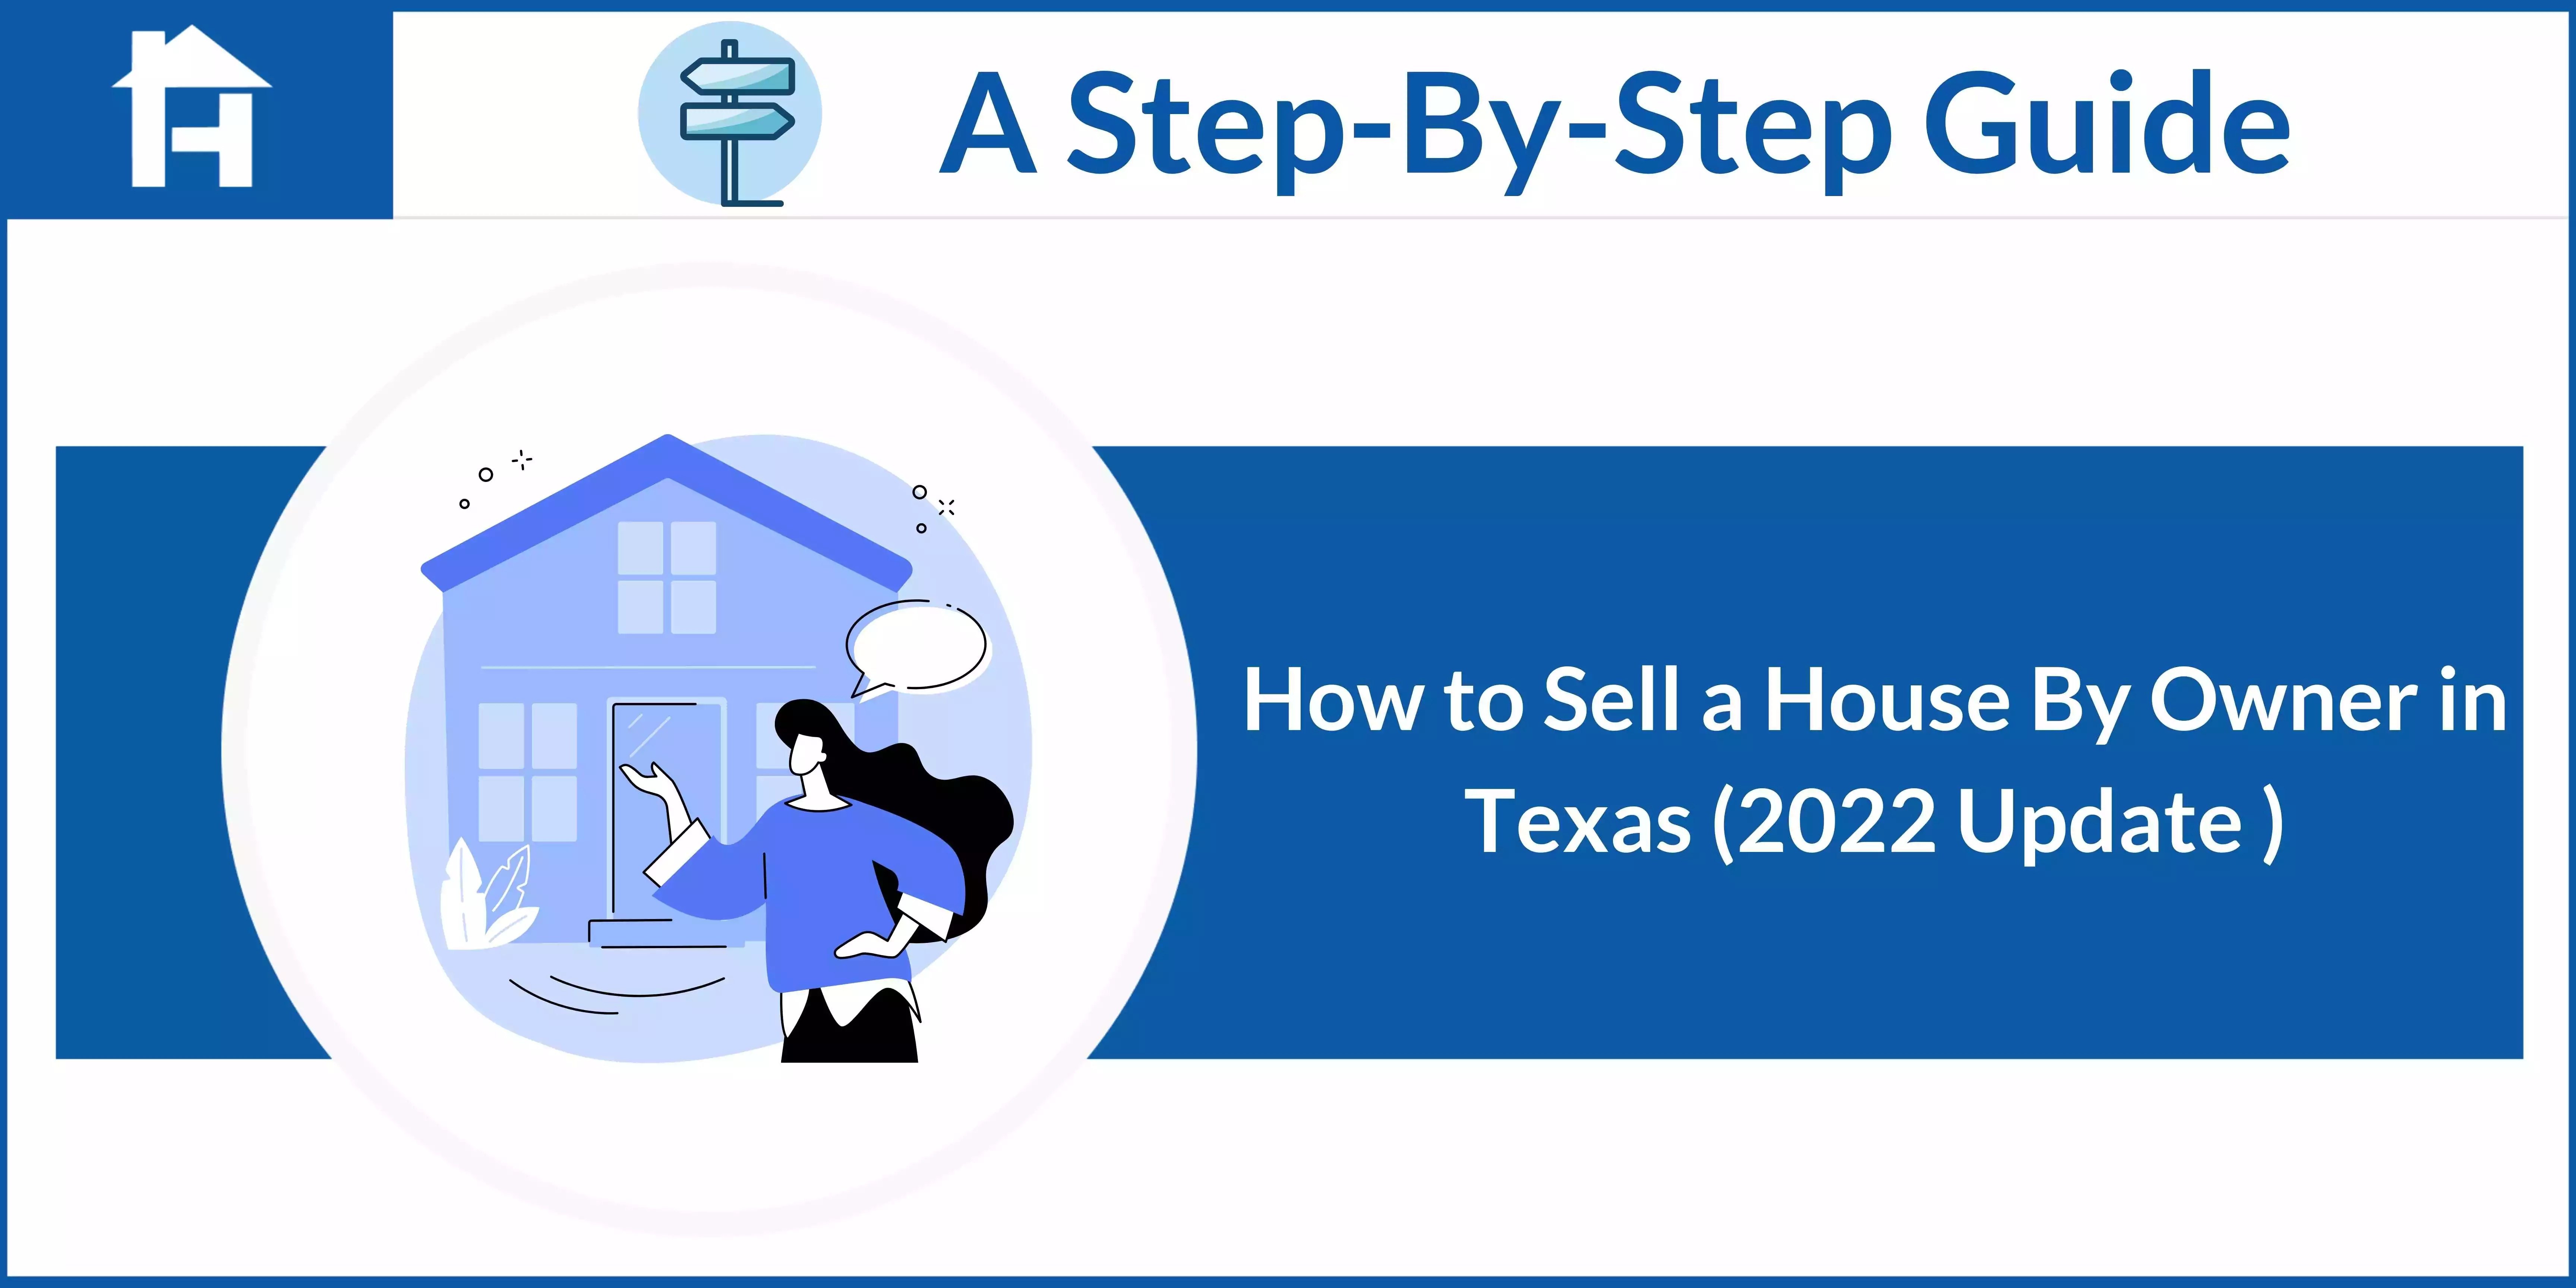 How to Sell a House By Owner in Texas